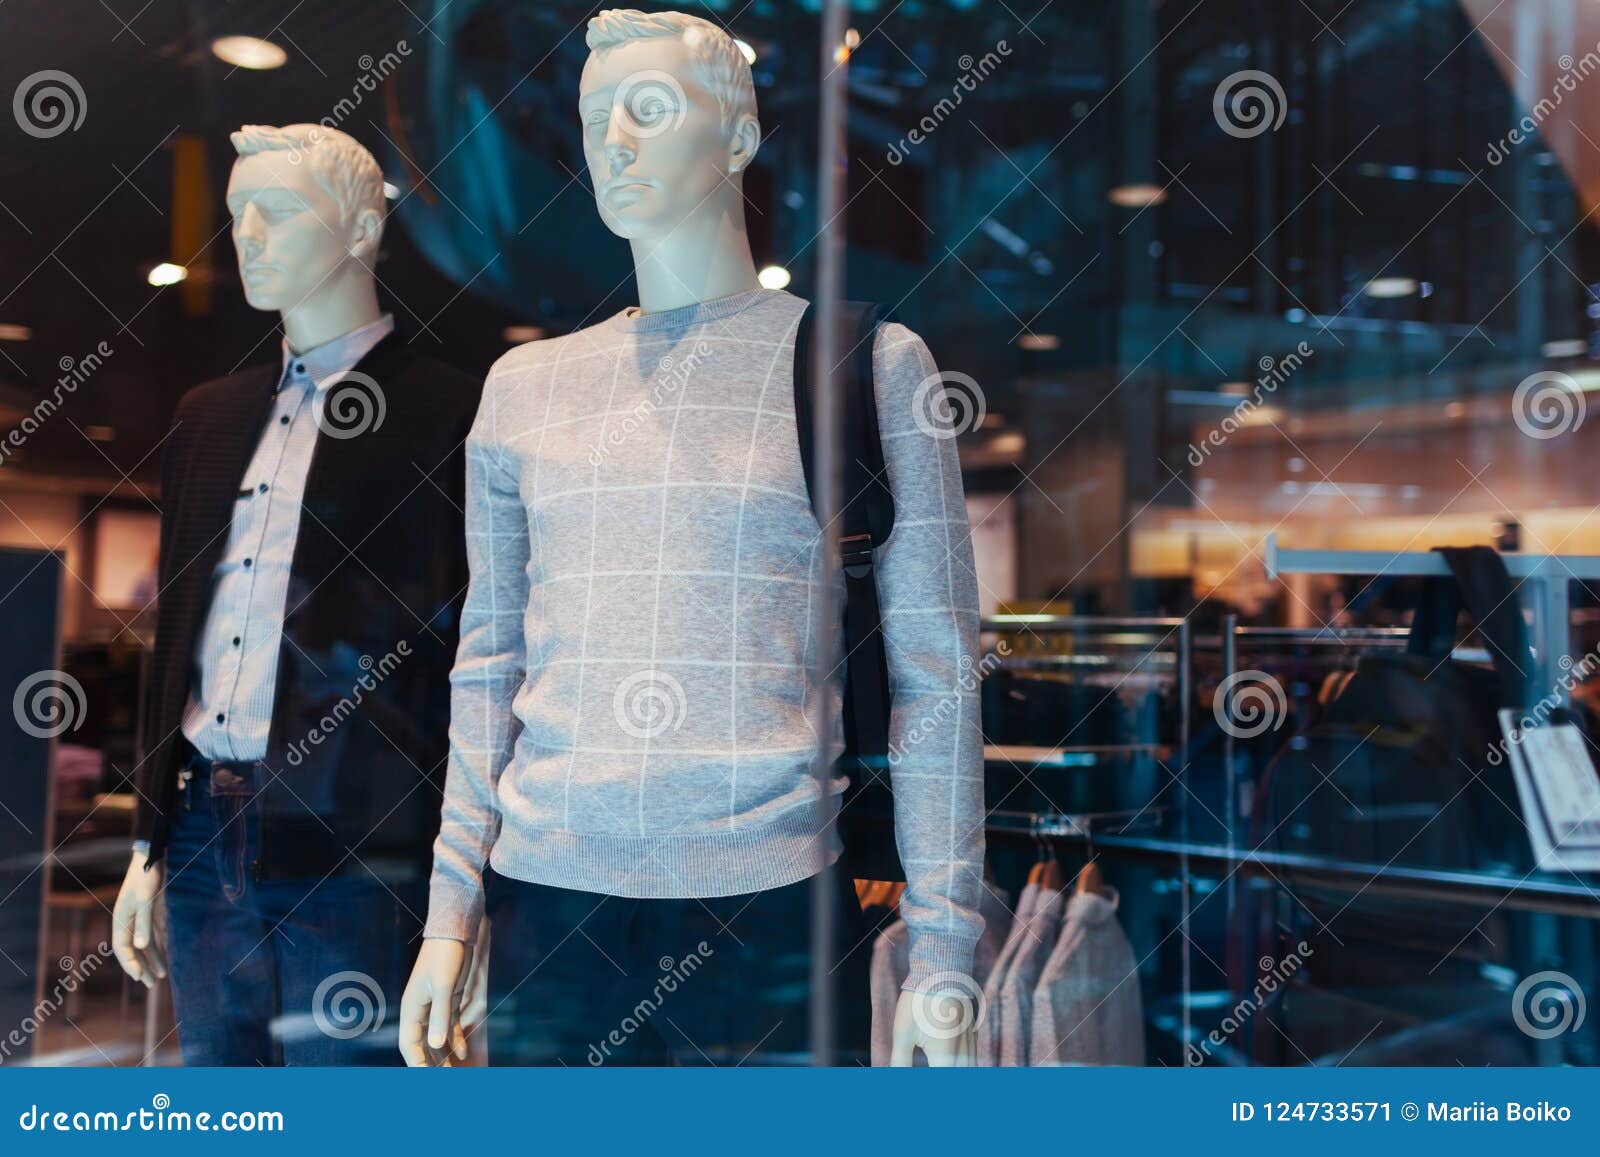 Manikins Dressed in Male Clothes and Accessories on Showcase of a Store ...